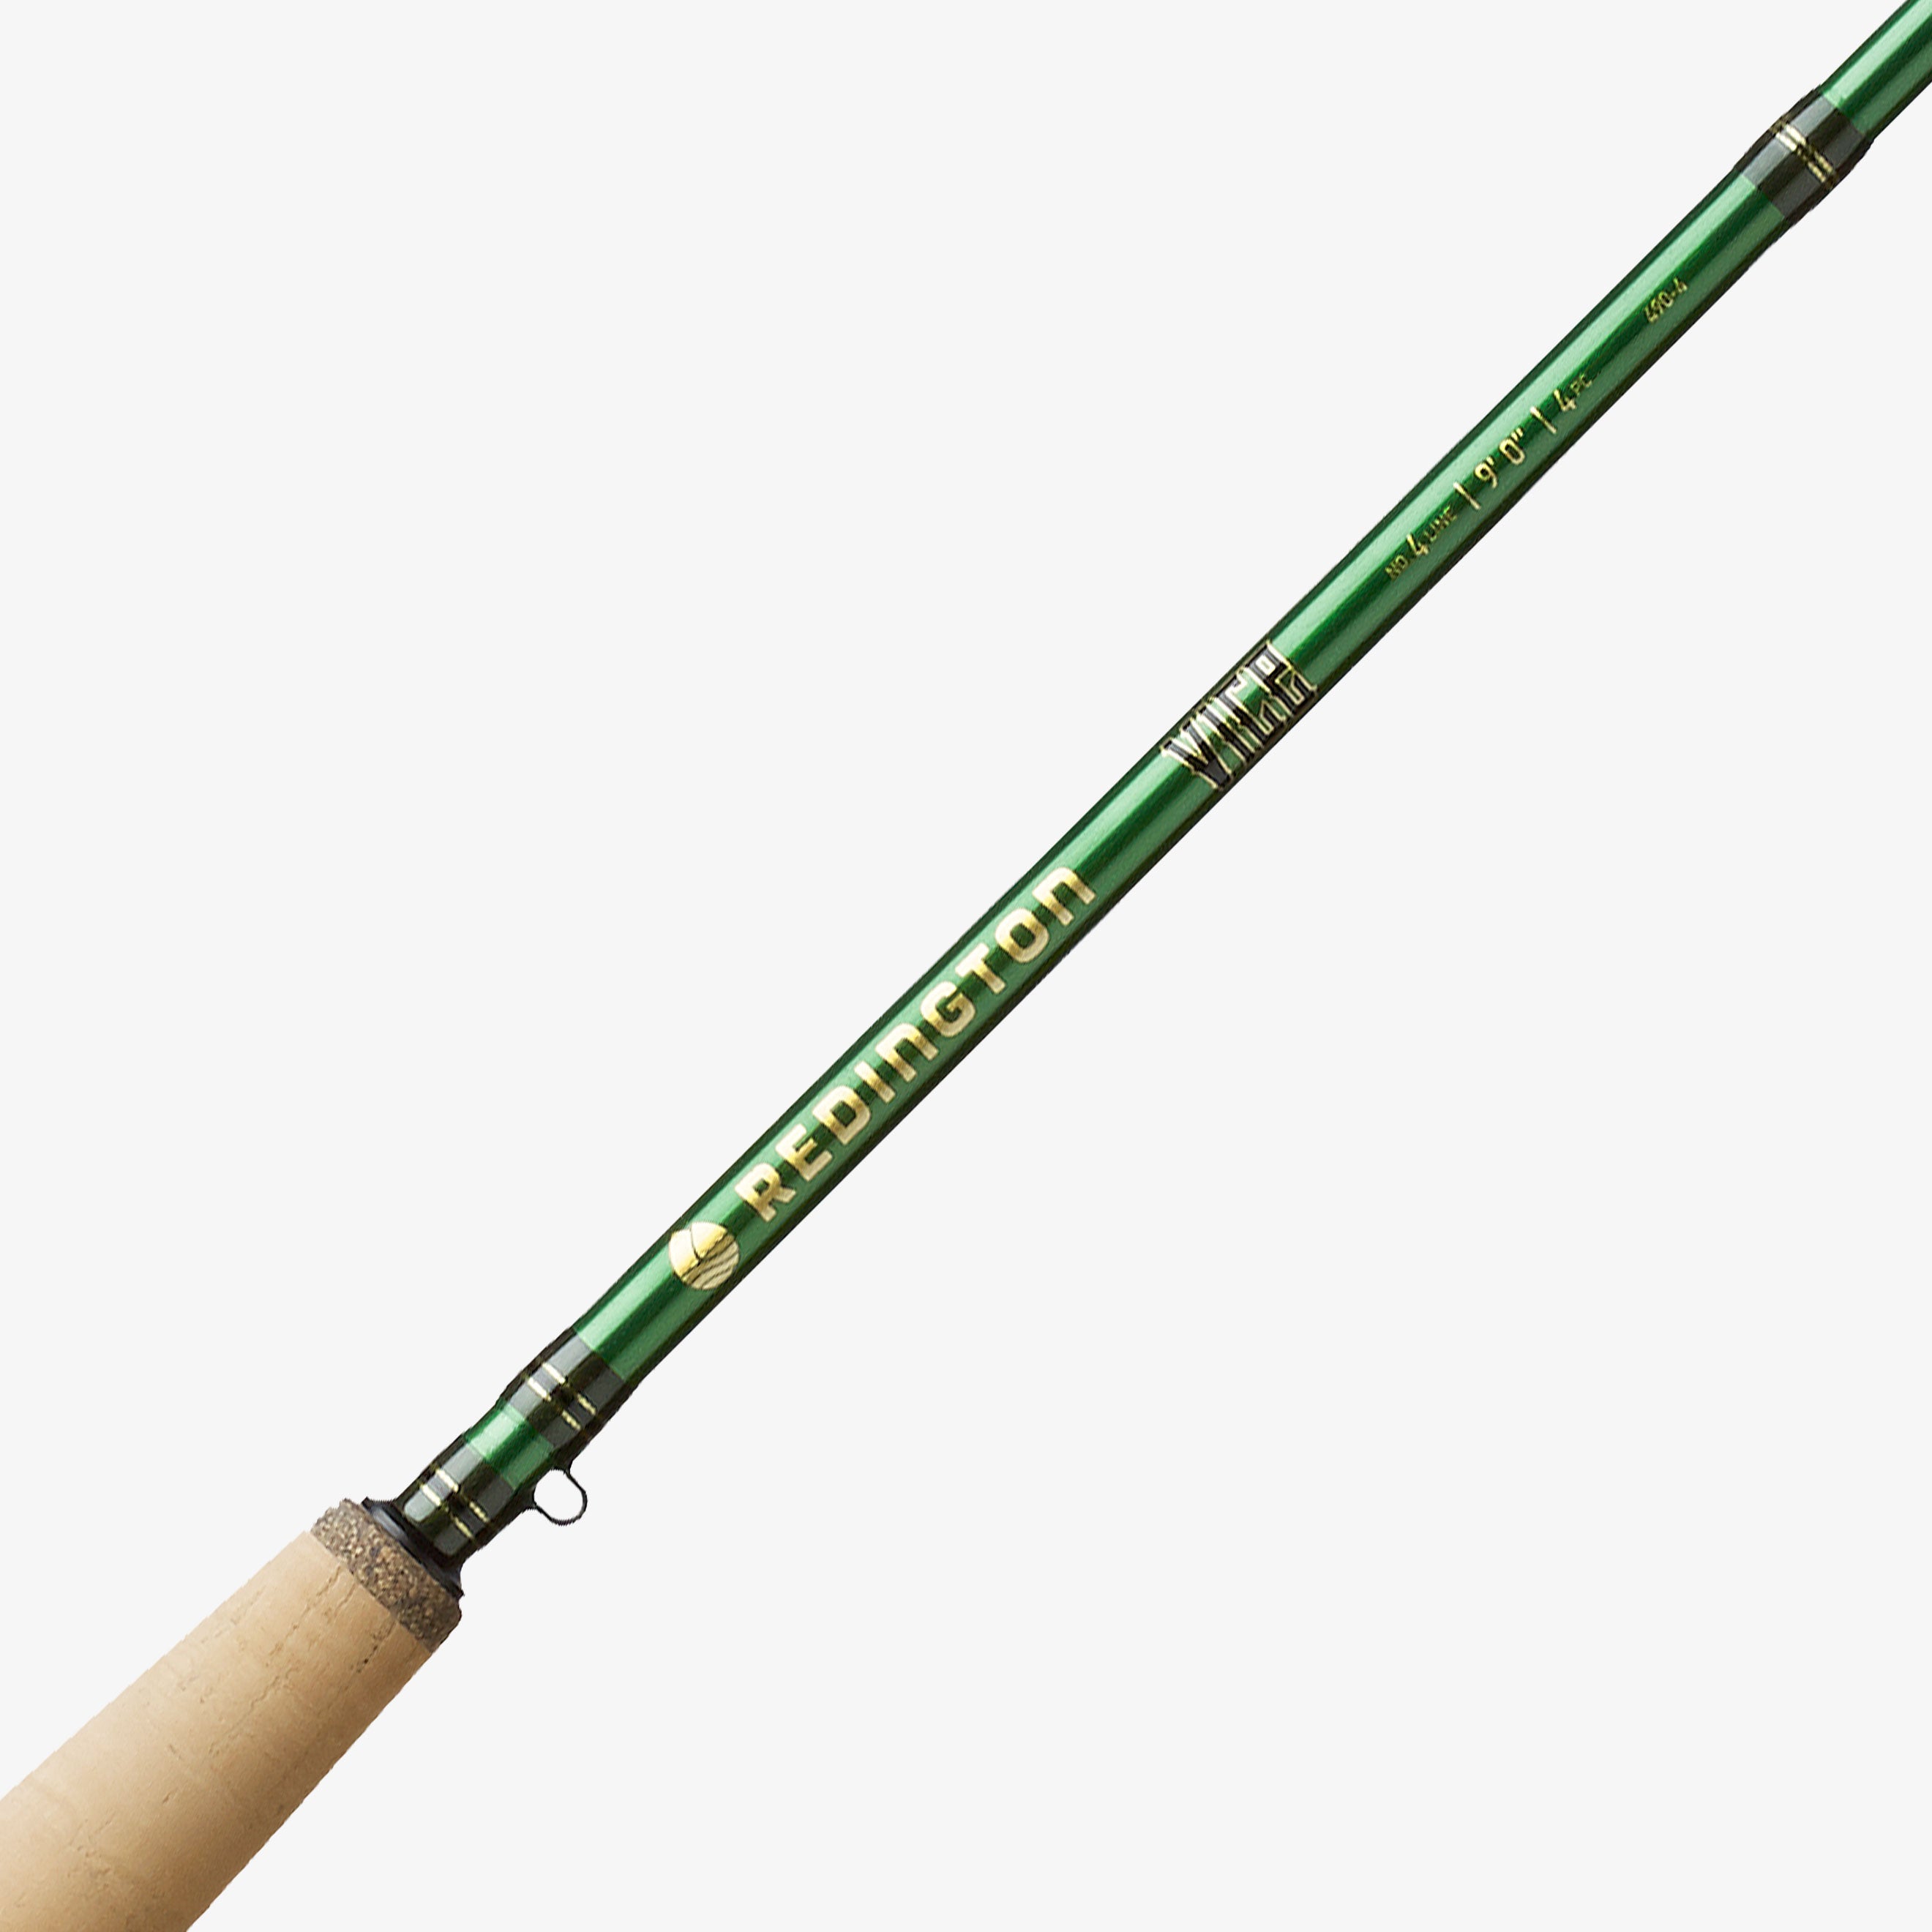 VICE Fly Fishing Rod 8 Weight, 10ft